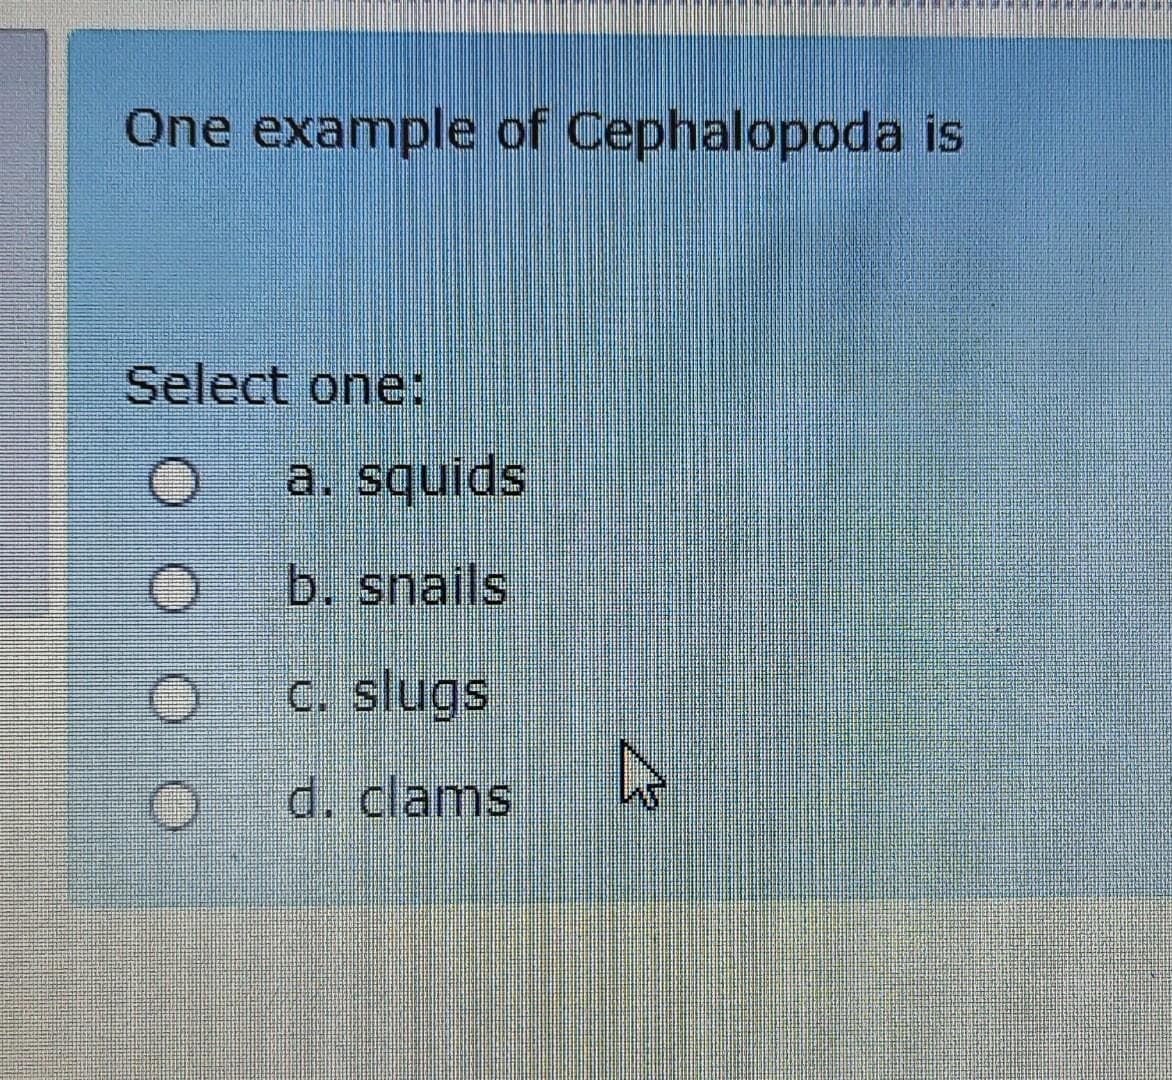 One example of Cephalopoda is
Select one:
a. squids
b. snails
C. slugs
d. clams
